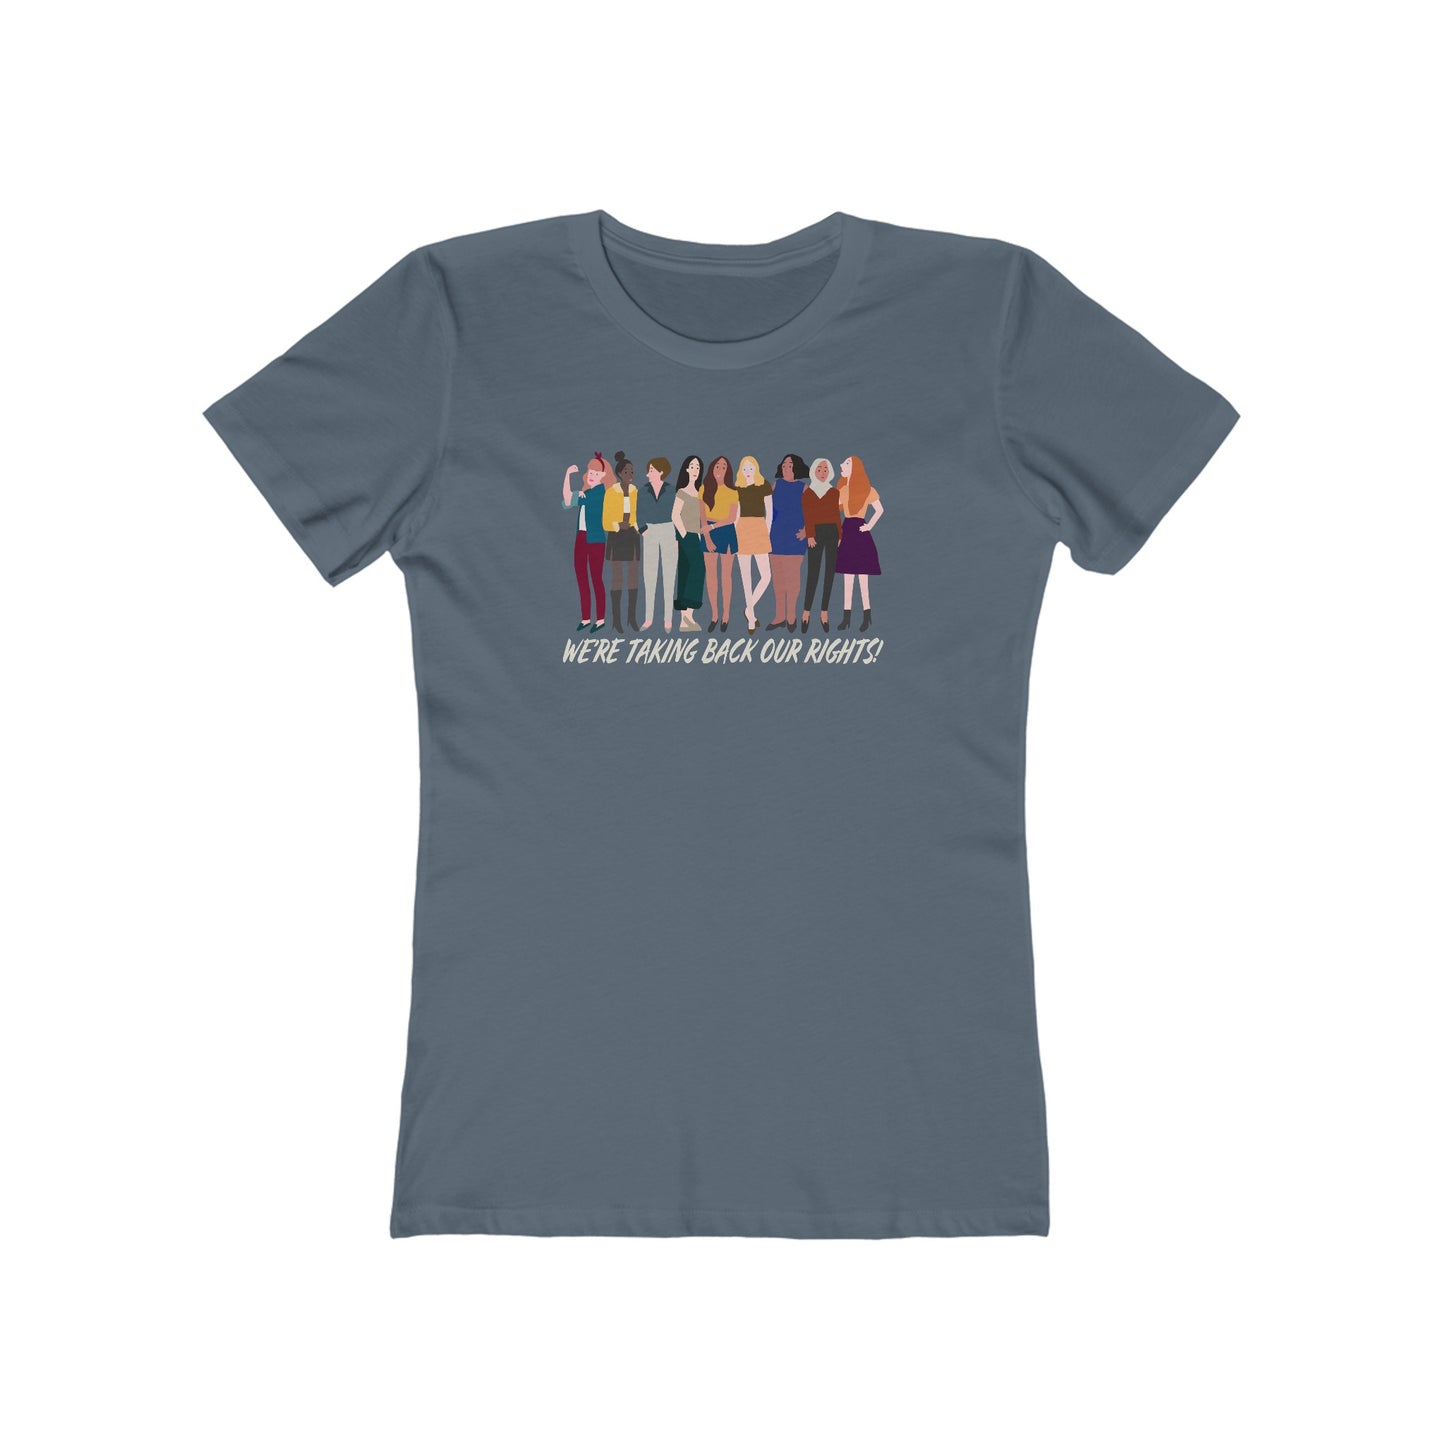 We're Taking Back Our Rights - Women's T-Shirt